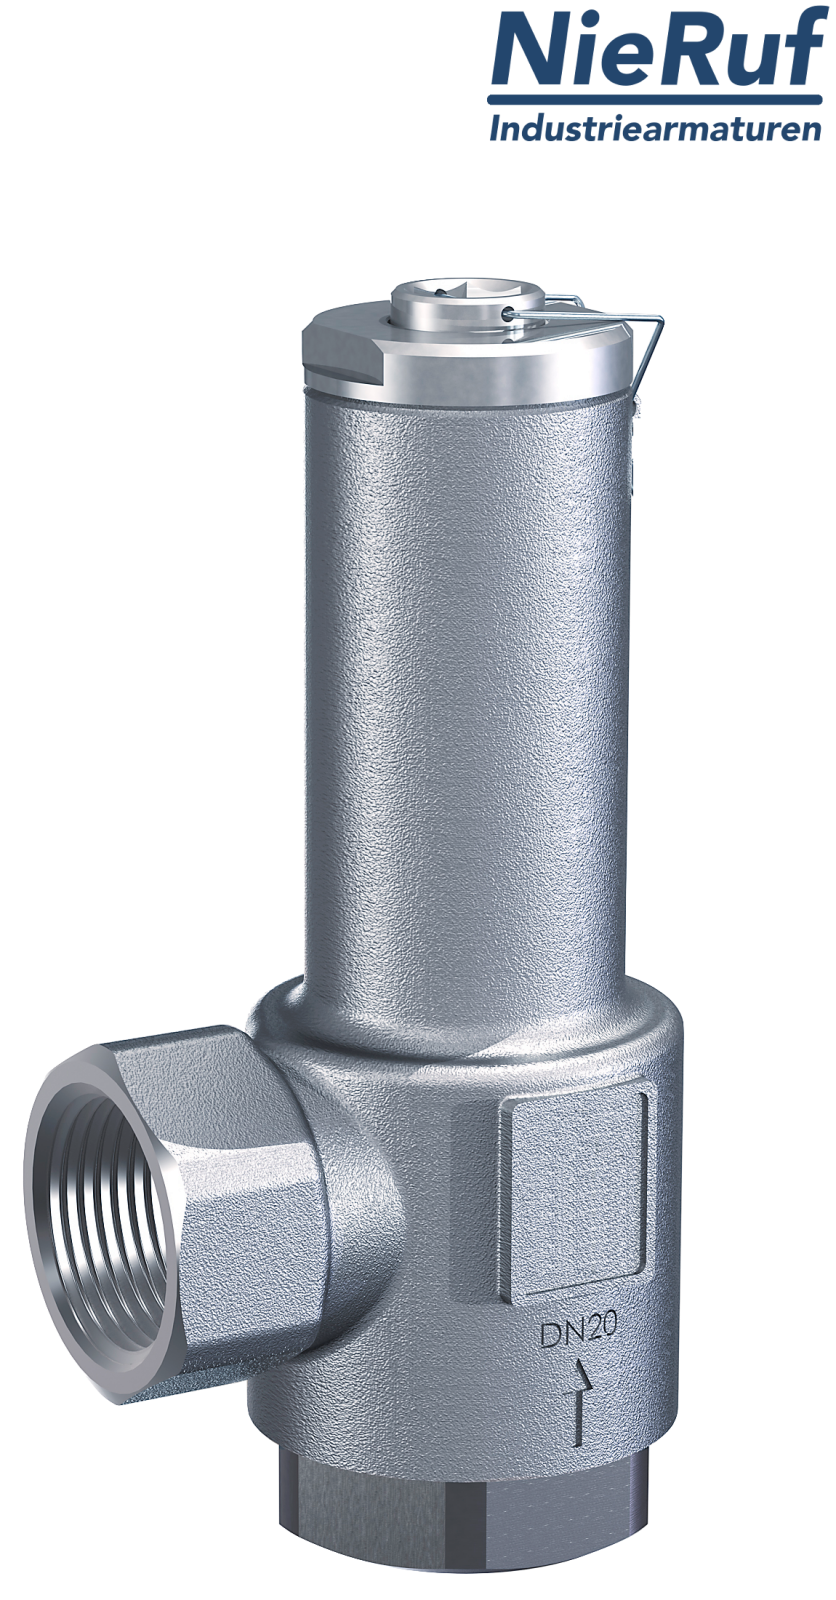 angle-type overflow valve 1/2" inch fm UV04 stainless steel AISI 316L 12 - 20 bar